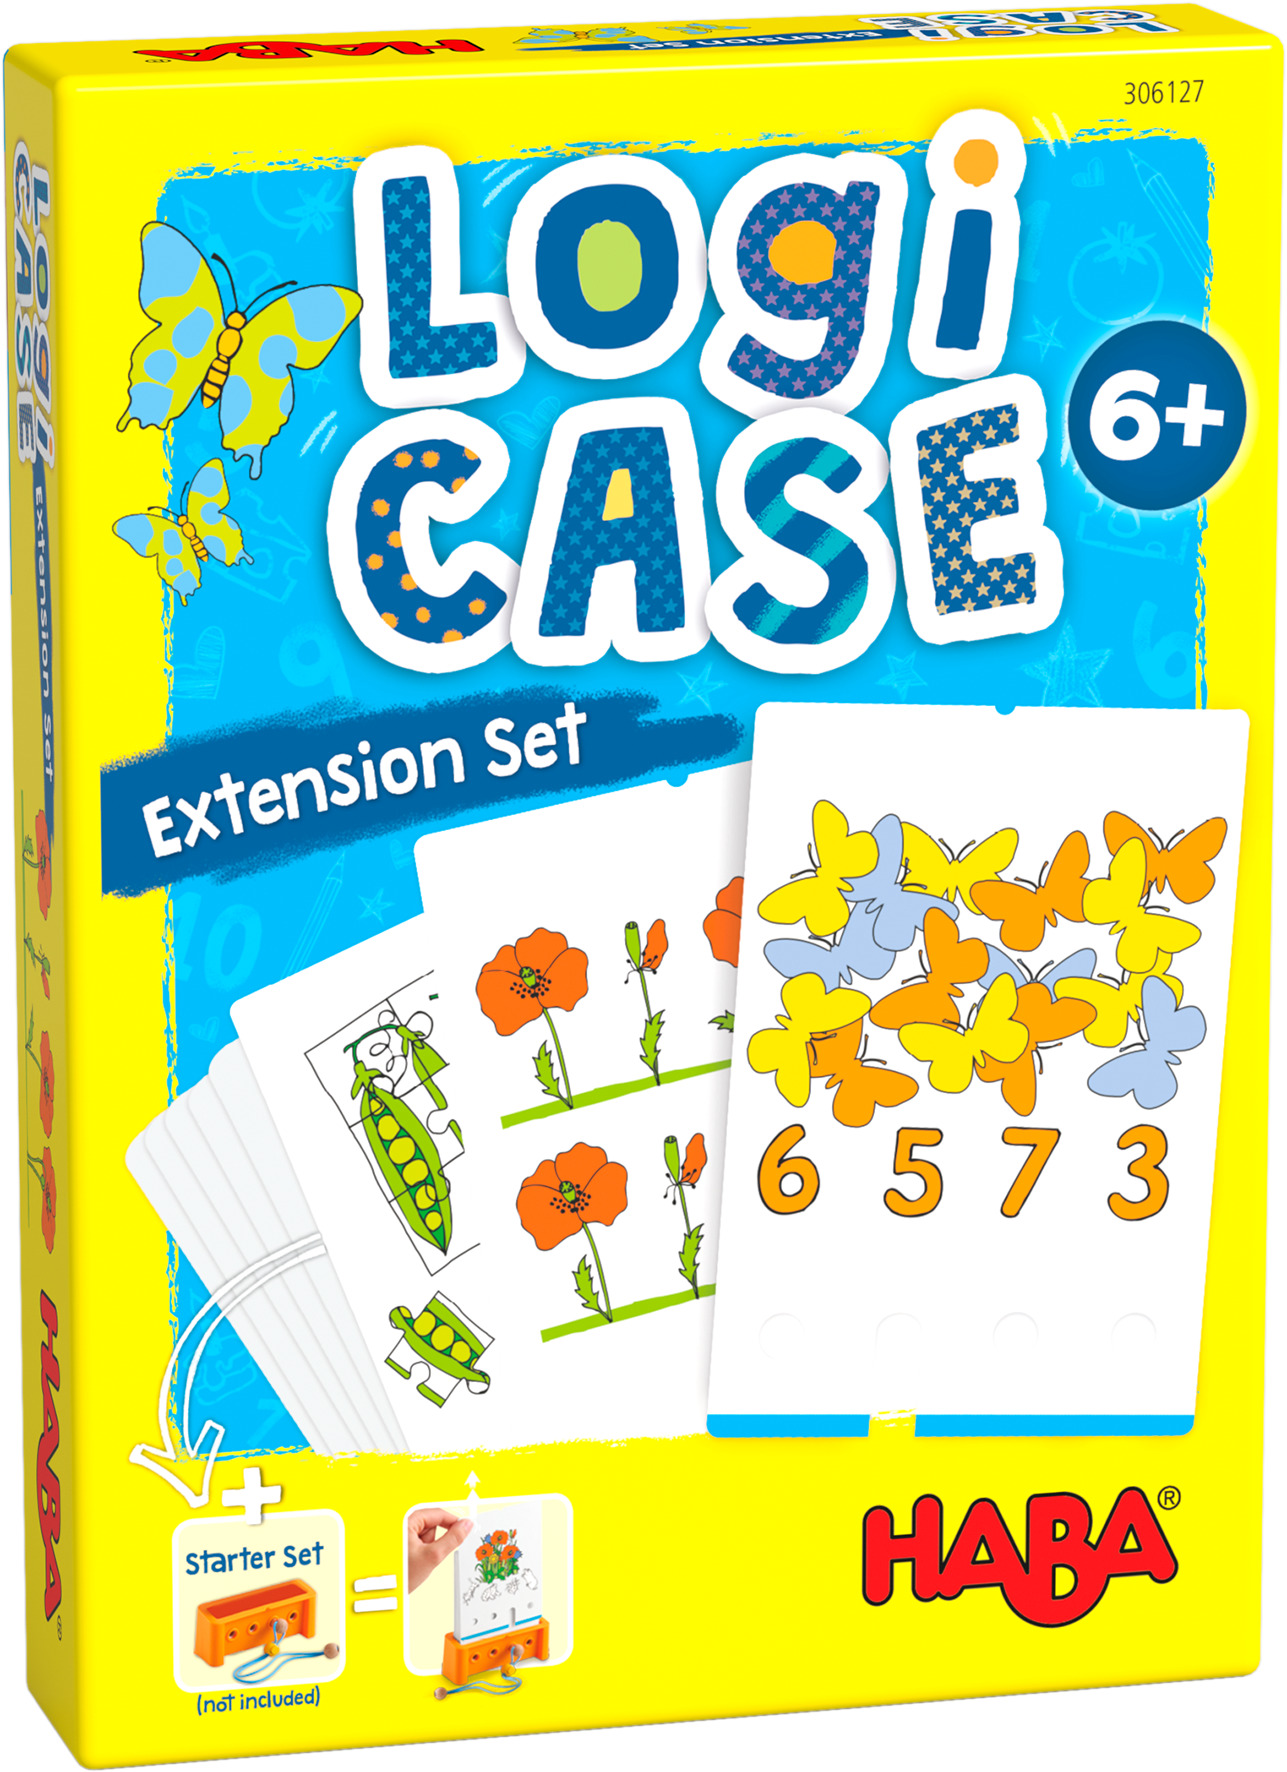 LOGICASE EXTENSION 6+ NATURE